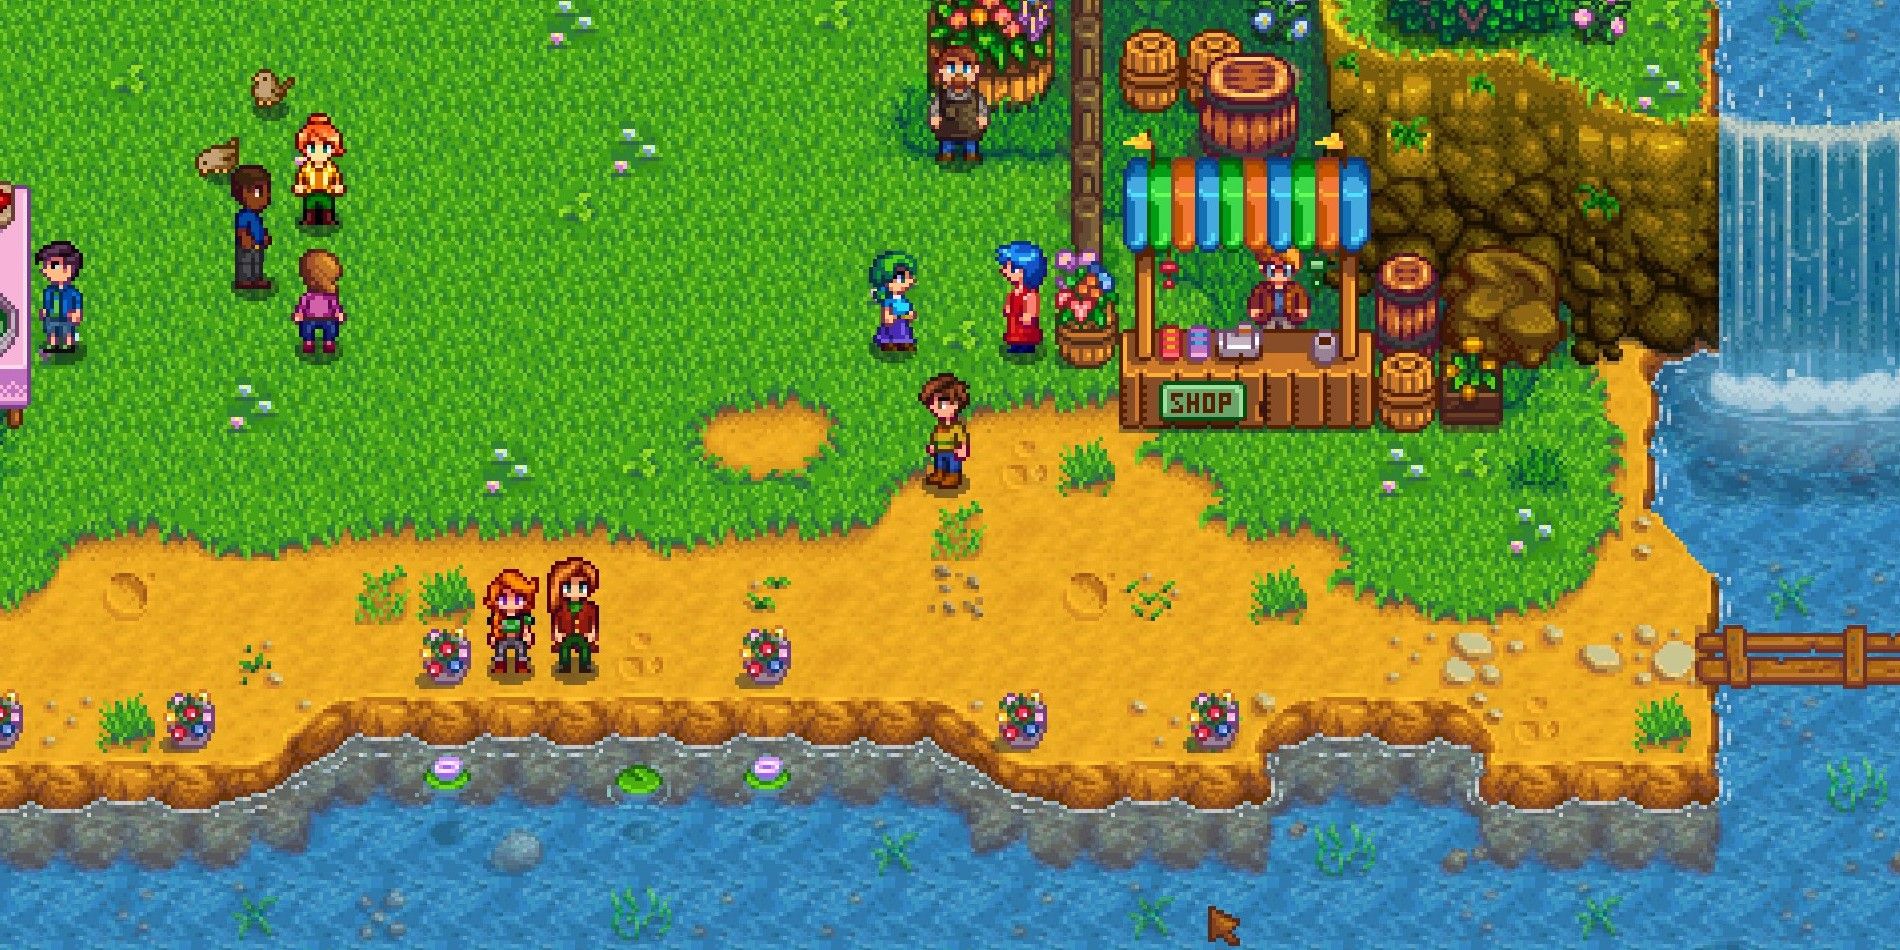 Where & What Is The Flower Dance In Stardew Valley 1.6?